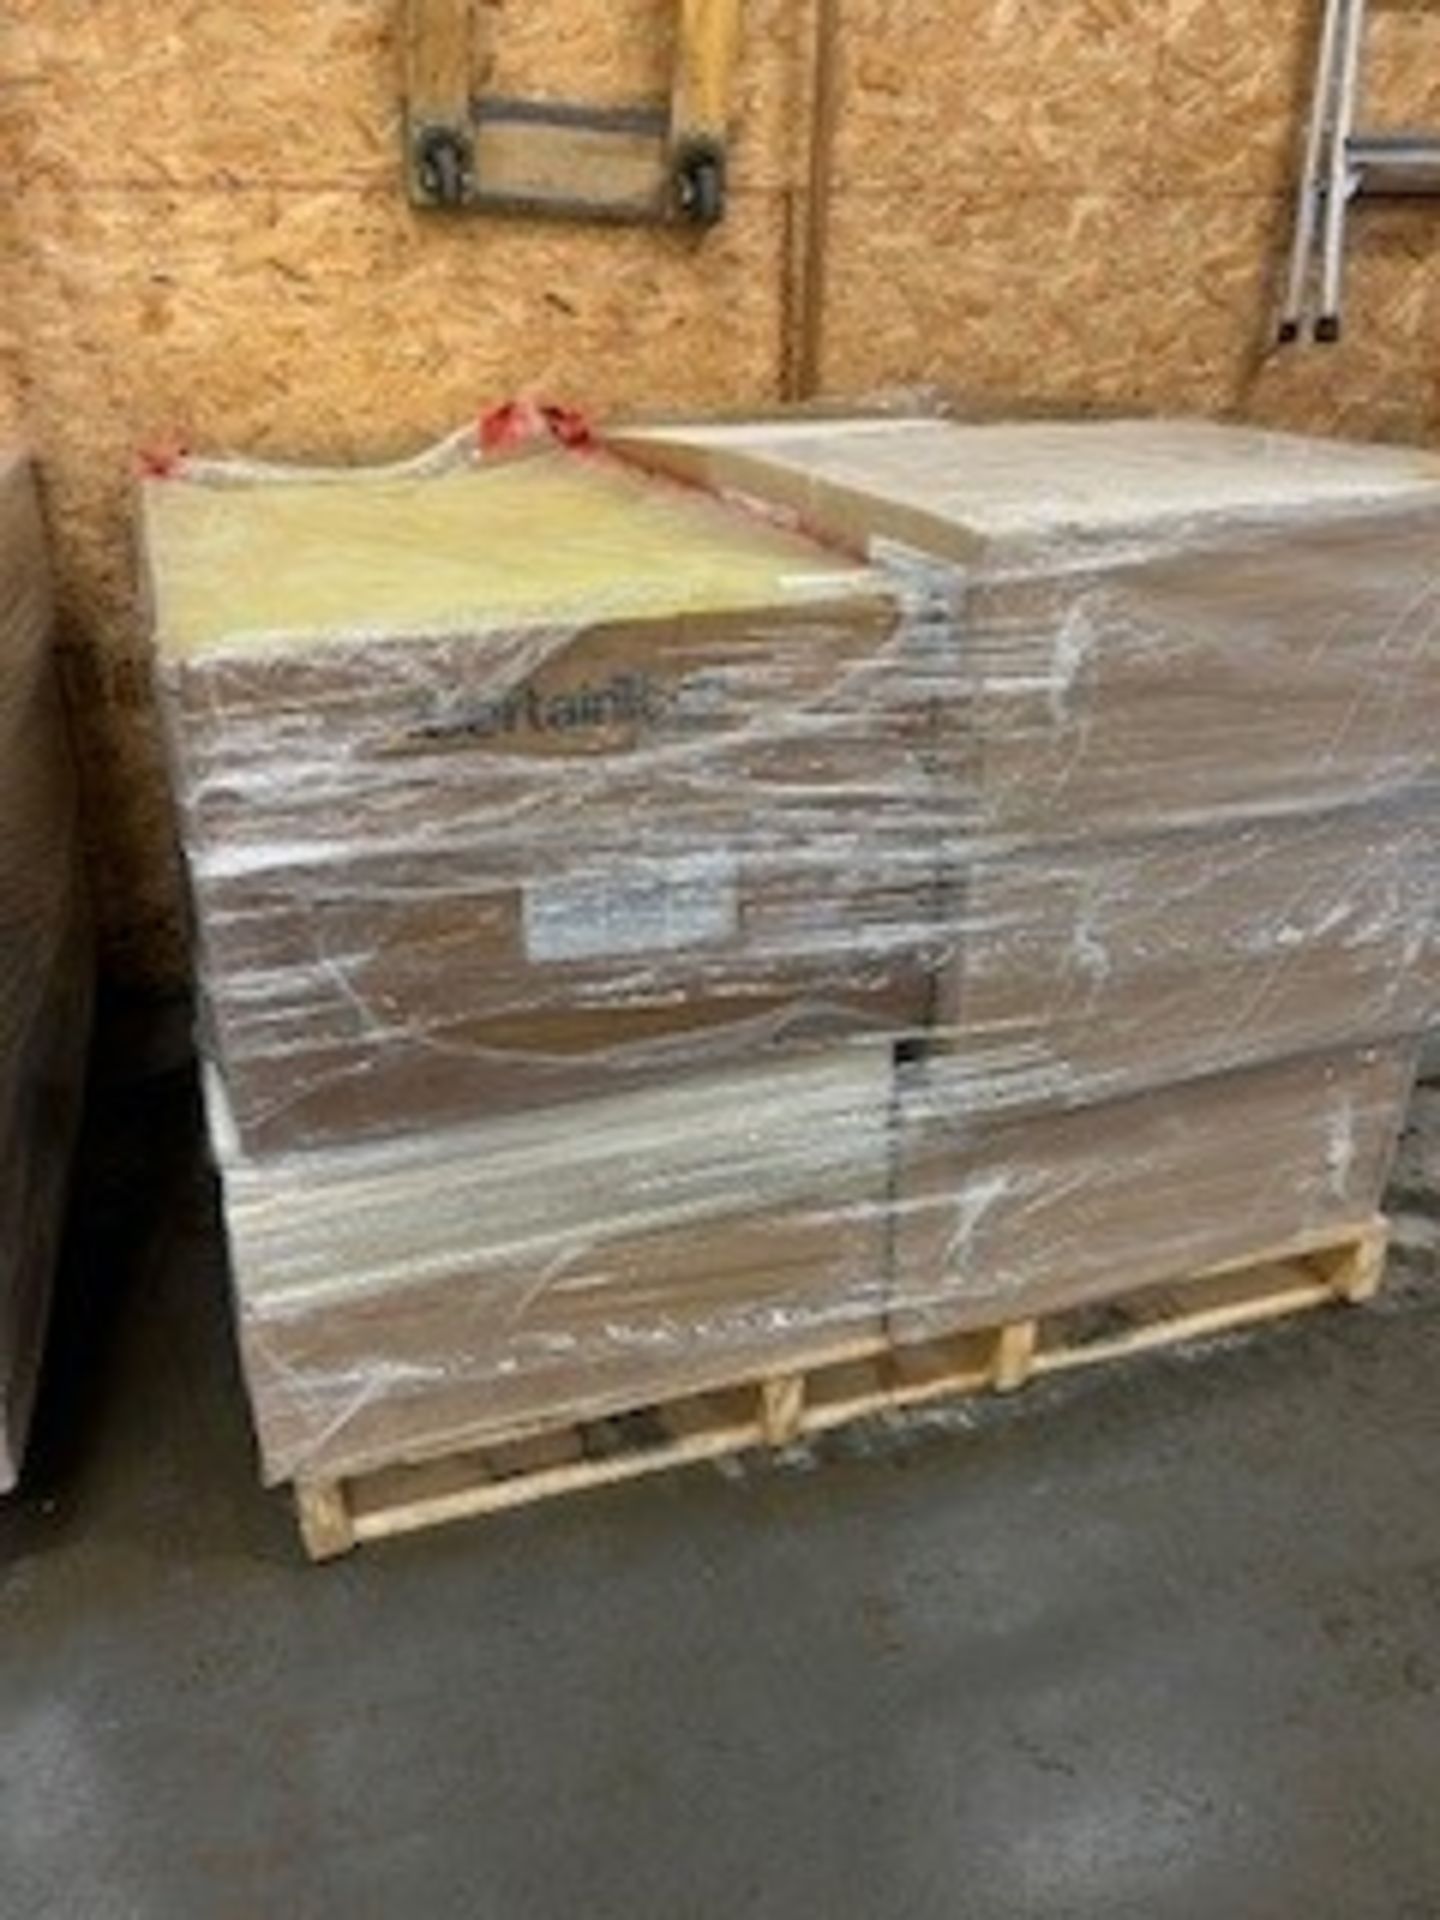 PALLET OF ASSORTED CEILING TILES 24X48 CERTAINTEED, ARMSTRONG TUNDRA BEVELED TEGULAR 24X24